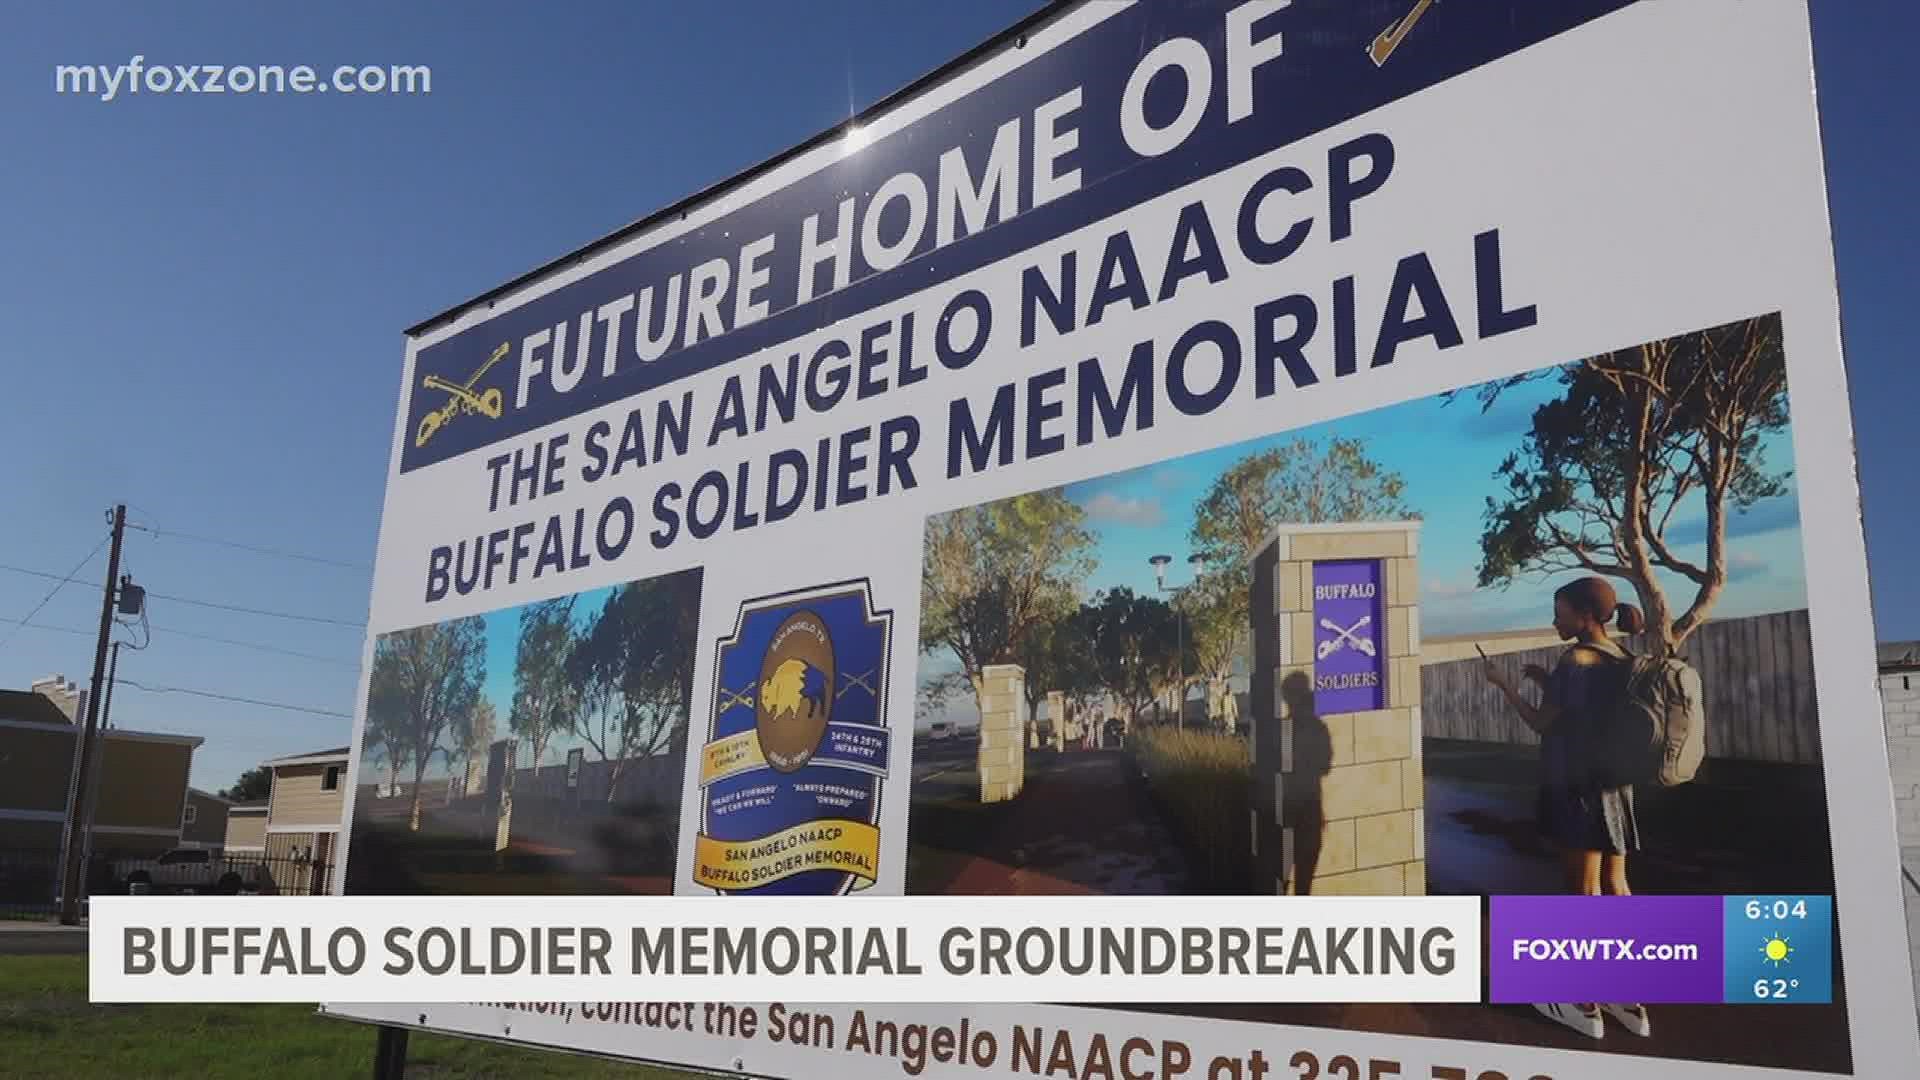 Buffalo Soldiers first arrived to the community in 1866 and they served through the late 1800s.